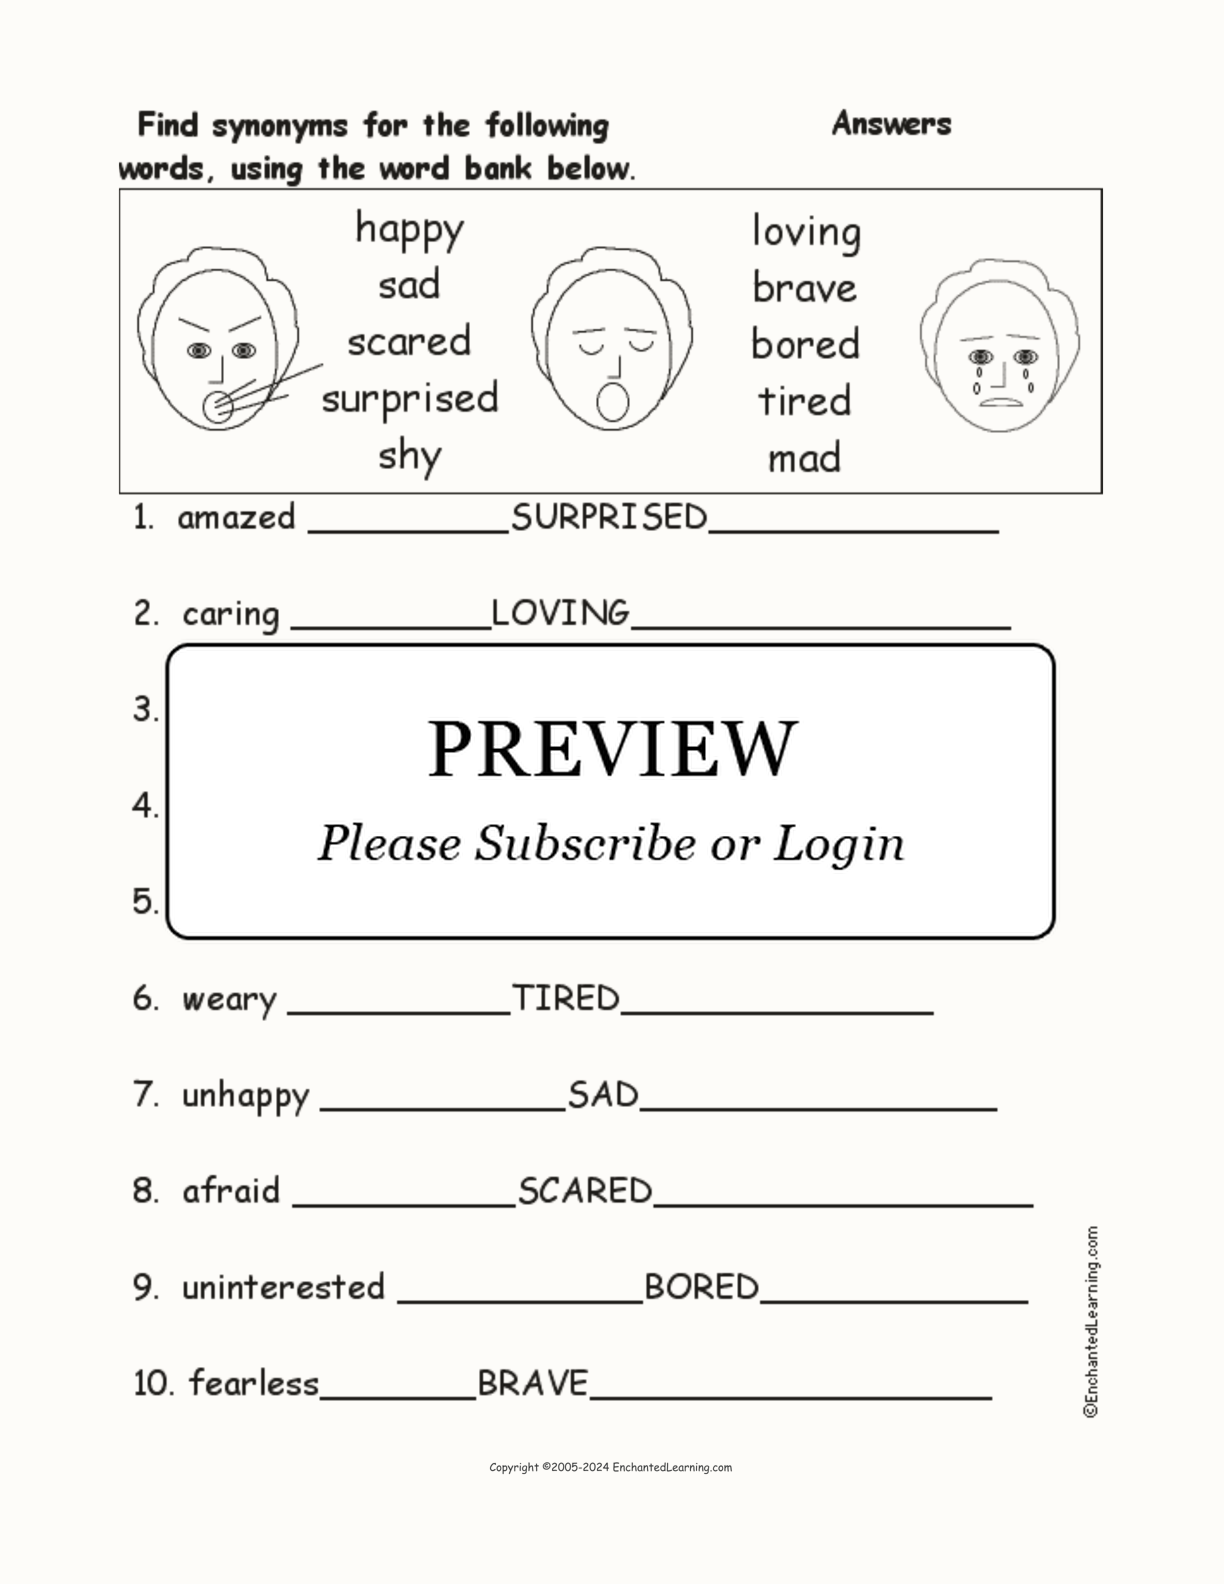 Emotion Synonyms interactive worksheet page 2